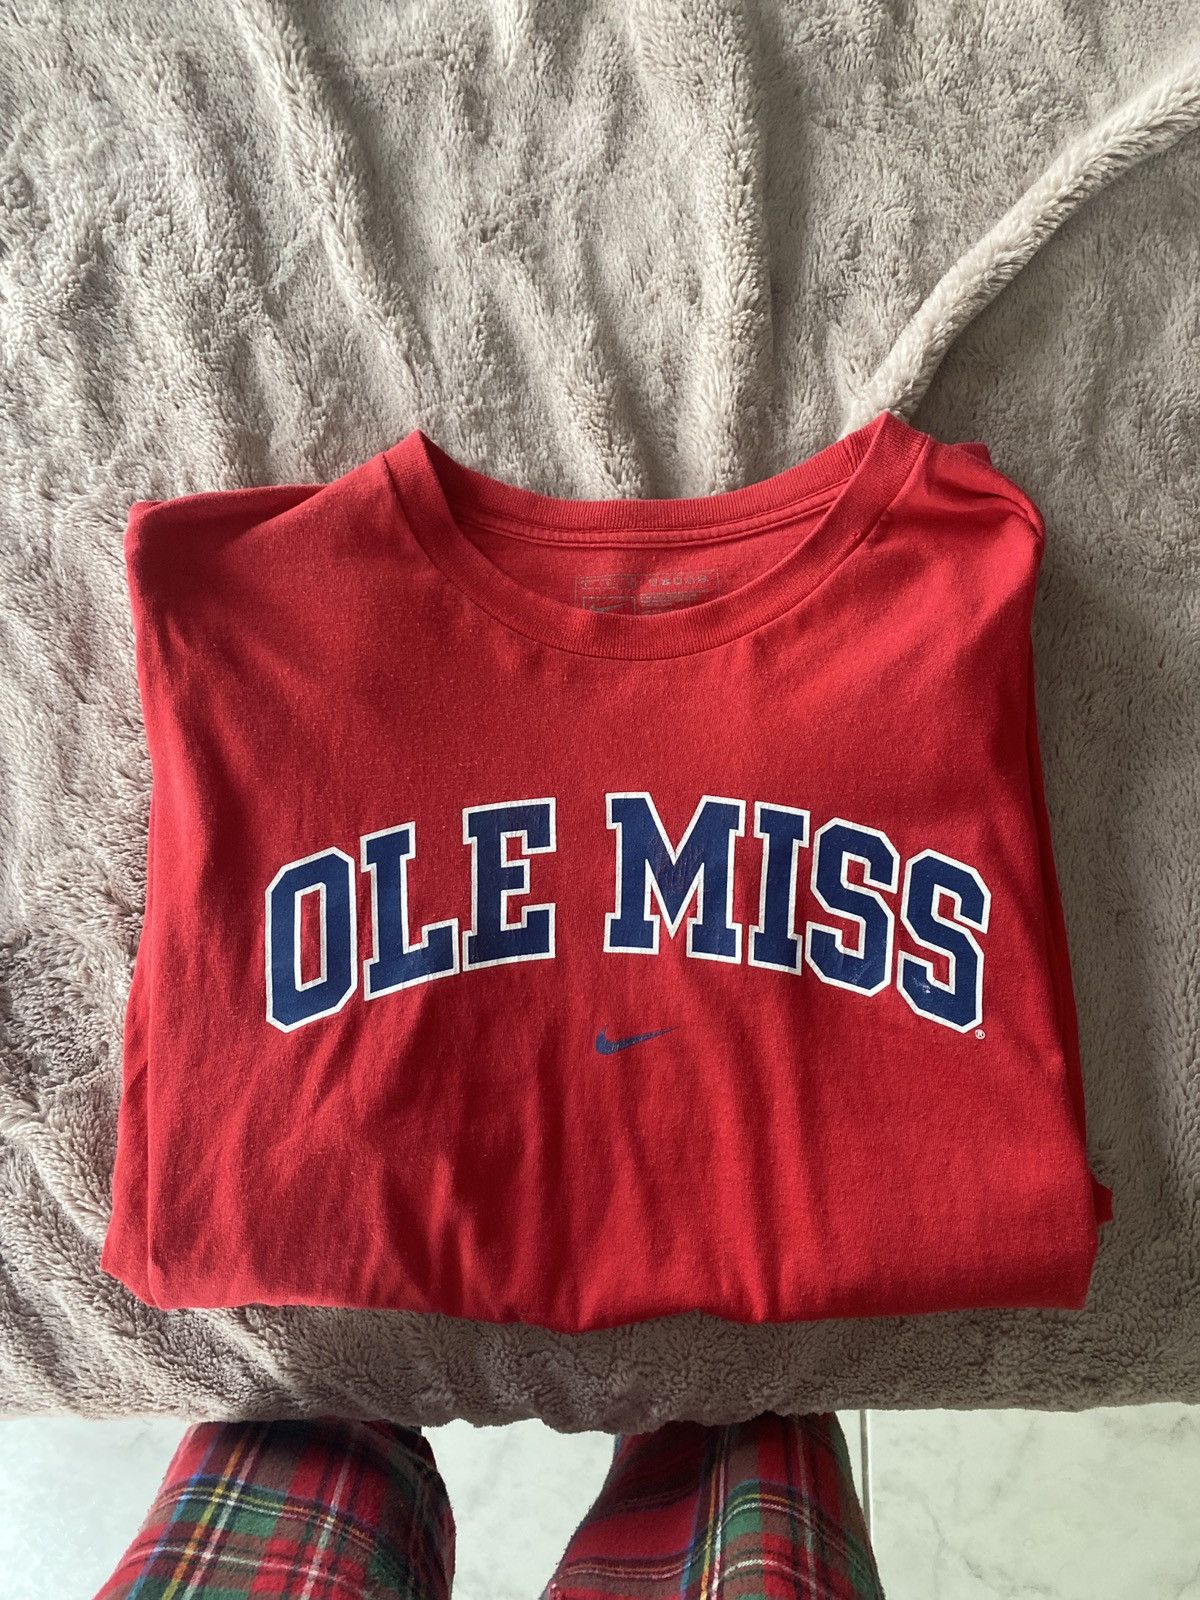 Nike NIKE X OLE MISS CAMPUS COLLECTION | Grailed